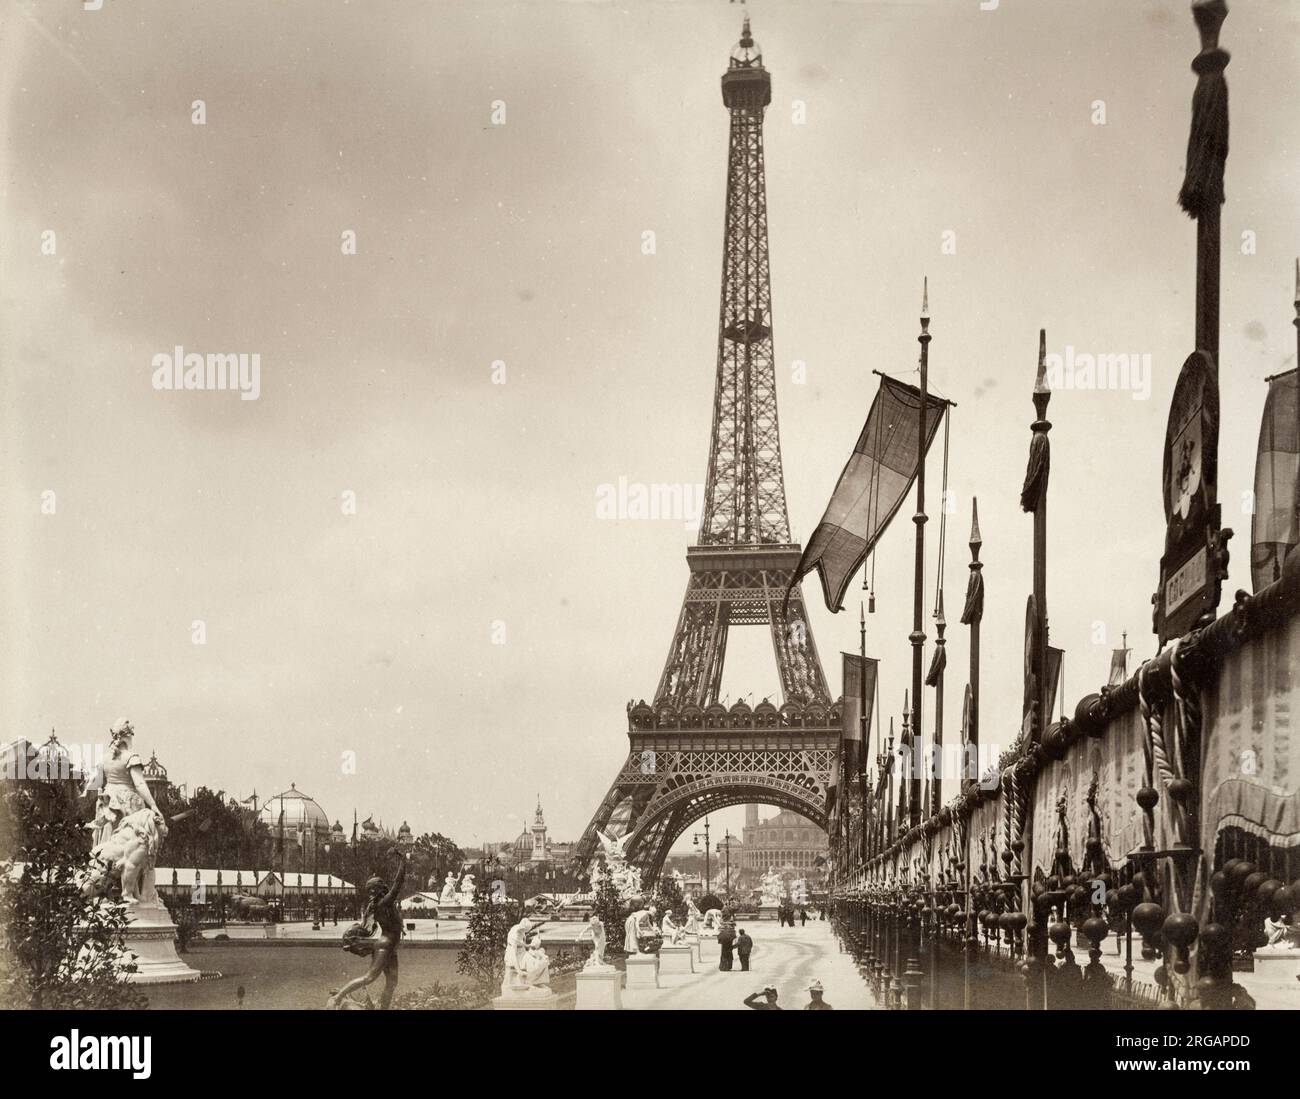 Vintage 1900 century photograph: Eiffel Tower Paris, Exposition Universelle. The Exposition Universelle of 1900, better known in English as the 1900 Paris Exposition, was a world's fair held in Paris, France, from 14 April to 12 November 1900. Stock Photo